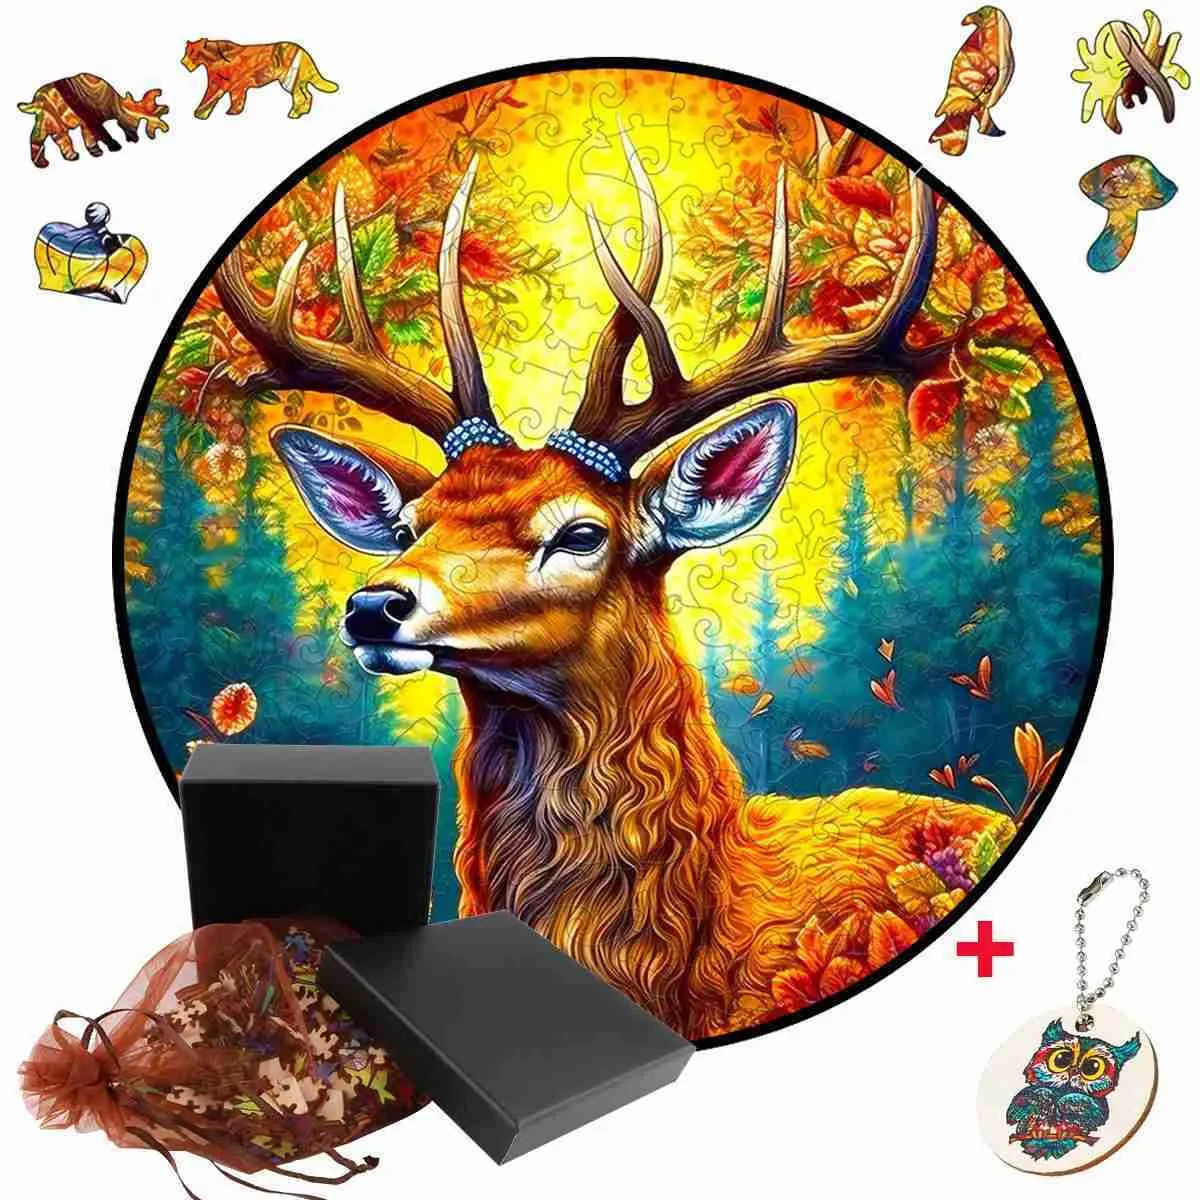 3D Puzzles Unique Irregular Deer Animal Shape Puzzle DIY Wooden Jigsaw Puzzle Family Games Wood Crafts Adult Kids Xmas Gift Home Decor 240419